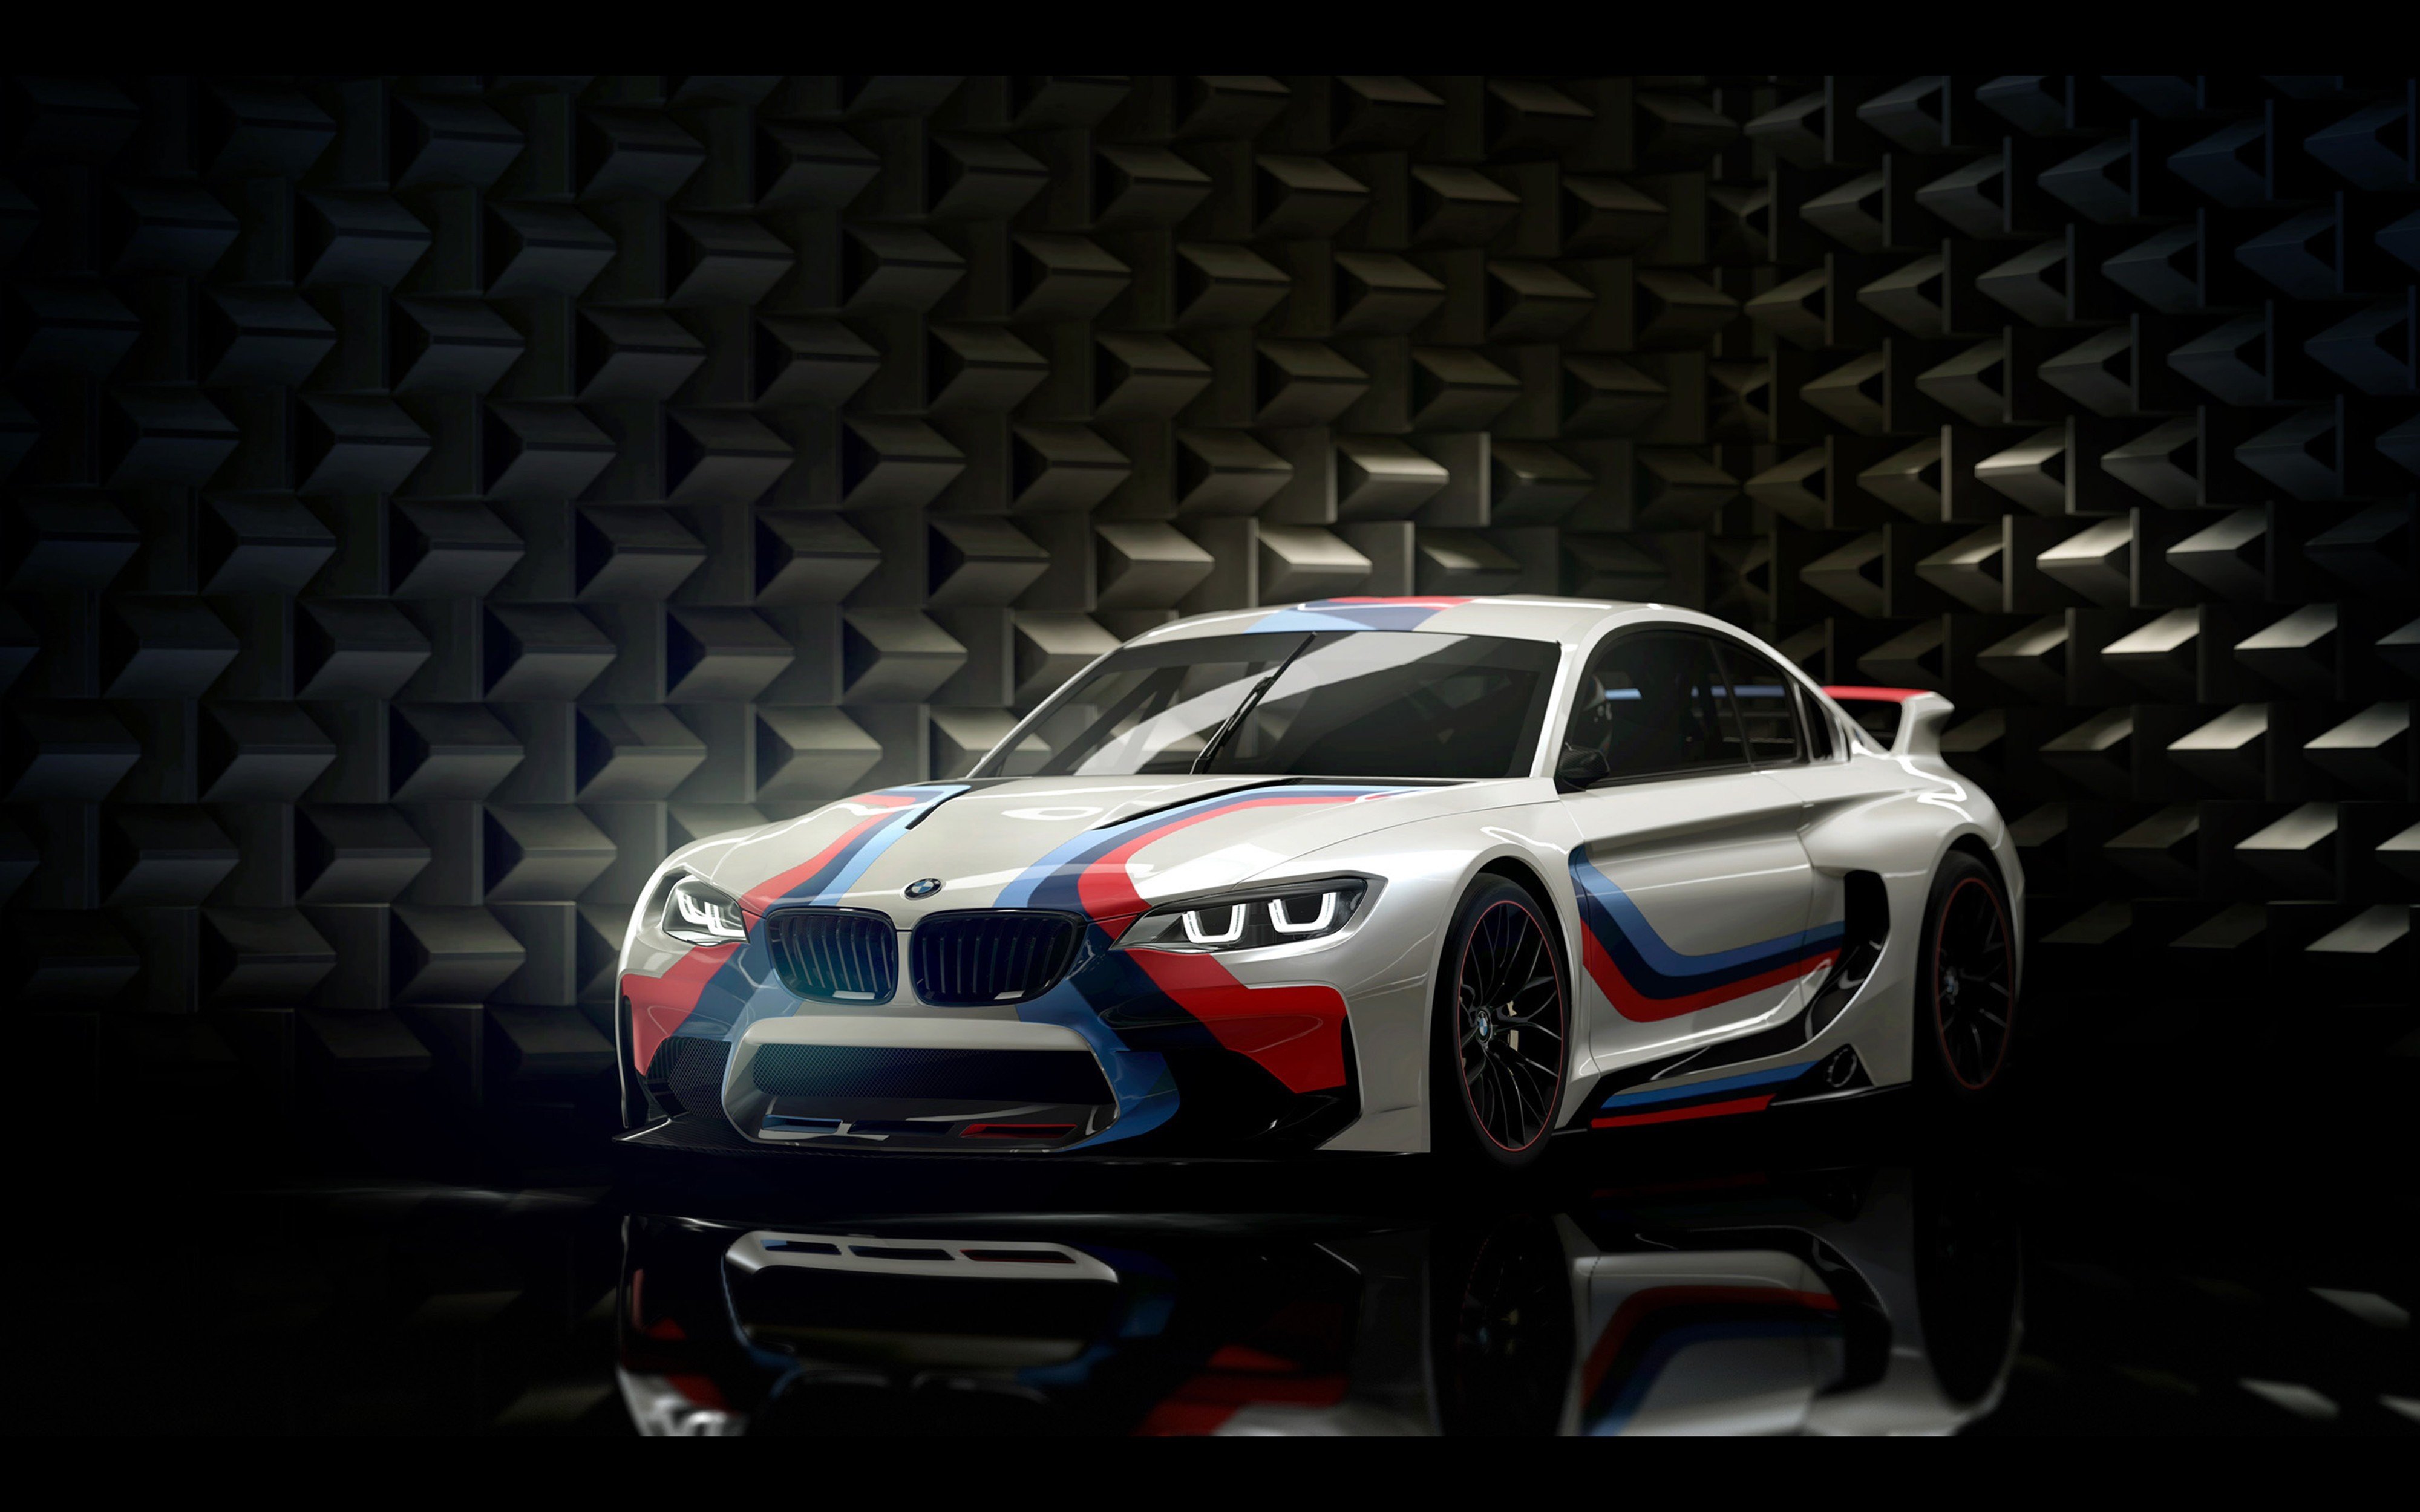 2014, Bmw, Vision, Gran turismo, Concept, Race, Car, Game, Vehicle, Racing, Germany, 4000x2500,  1 Wallpaper